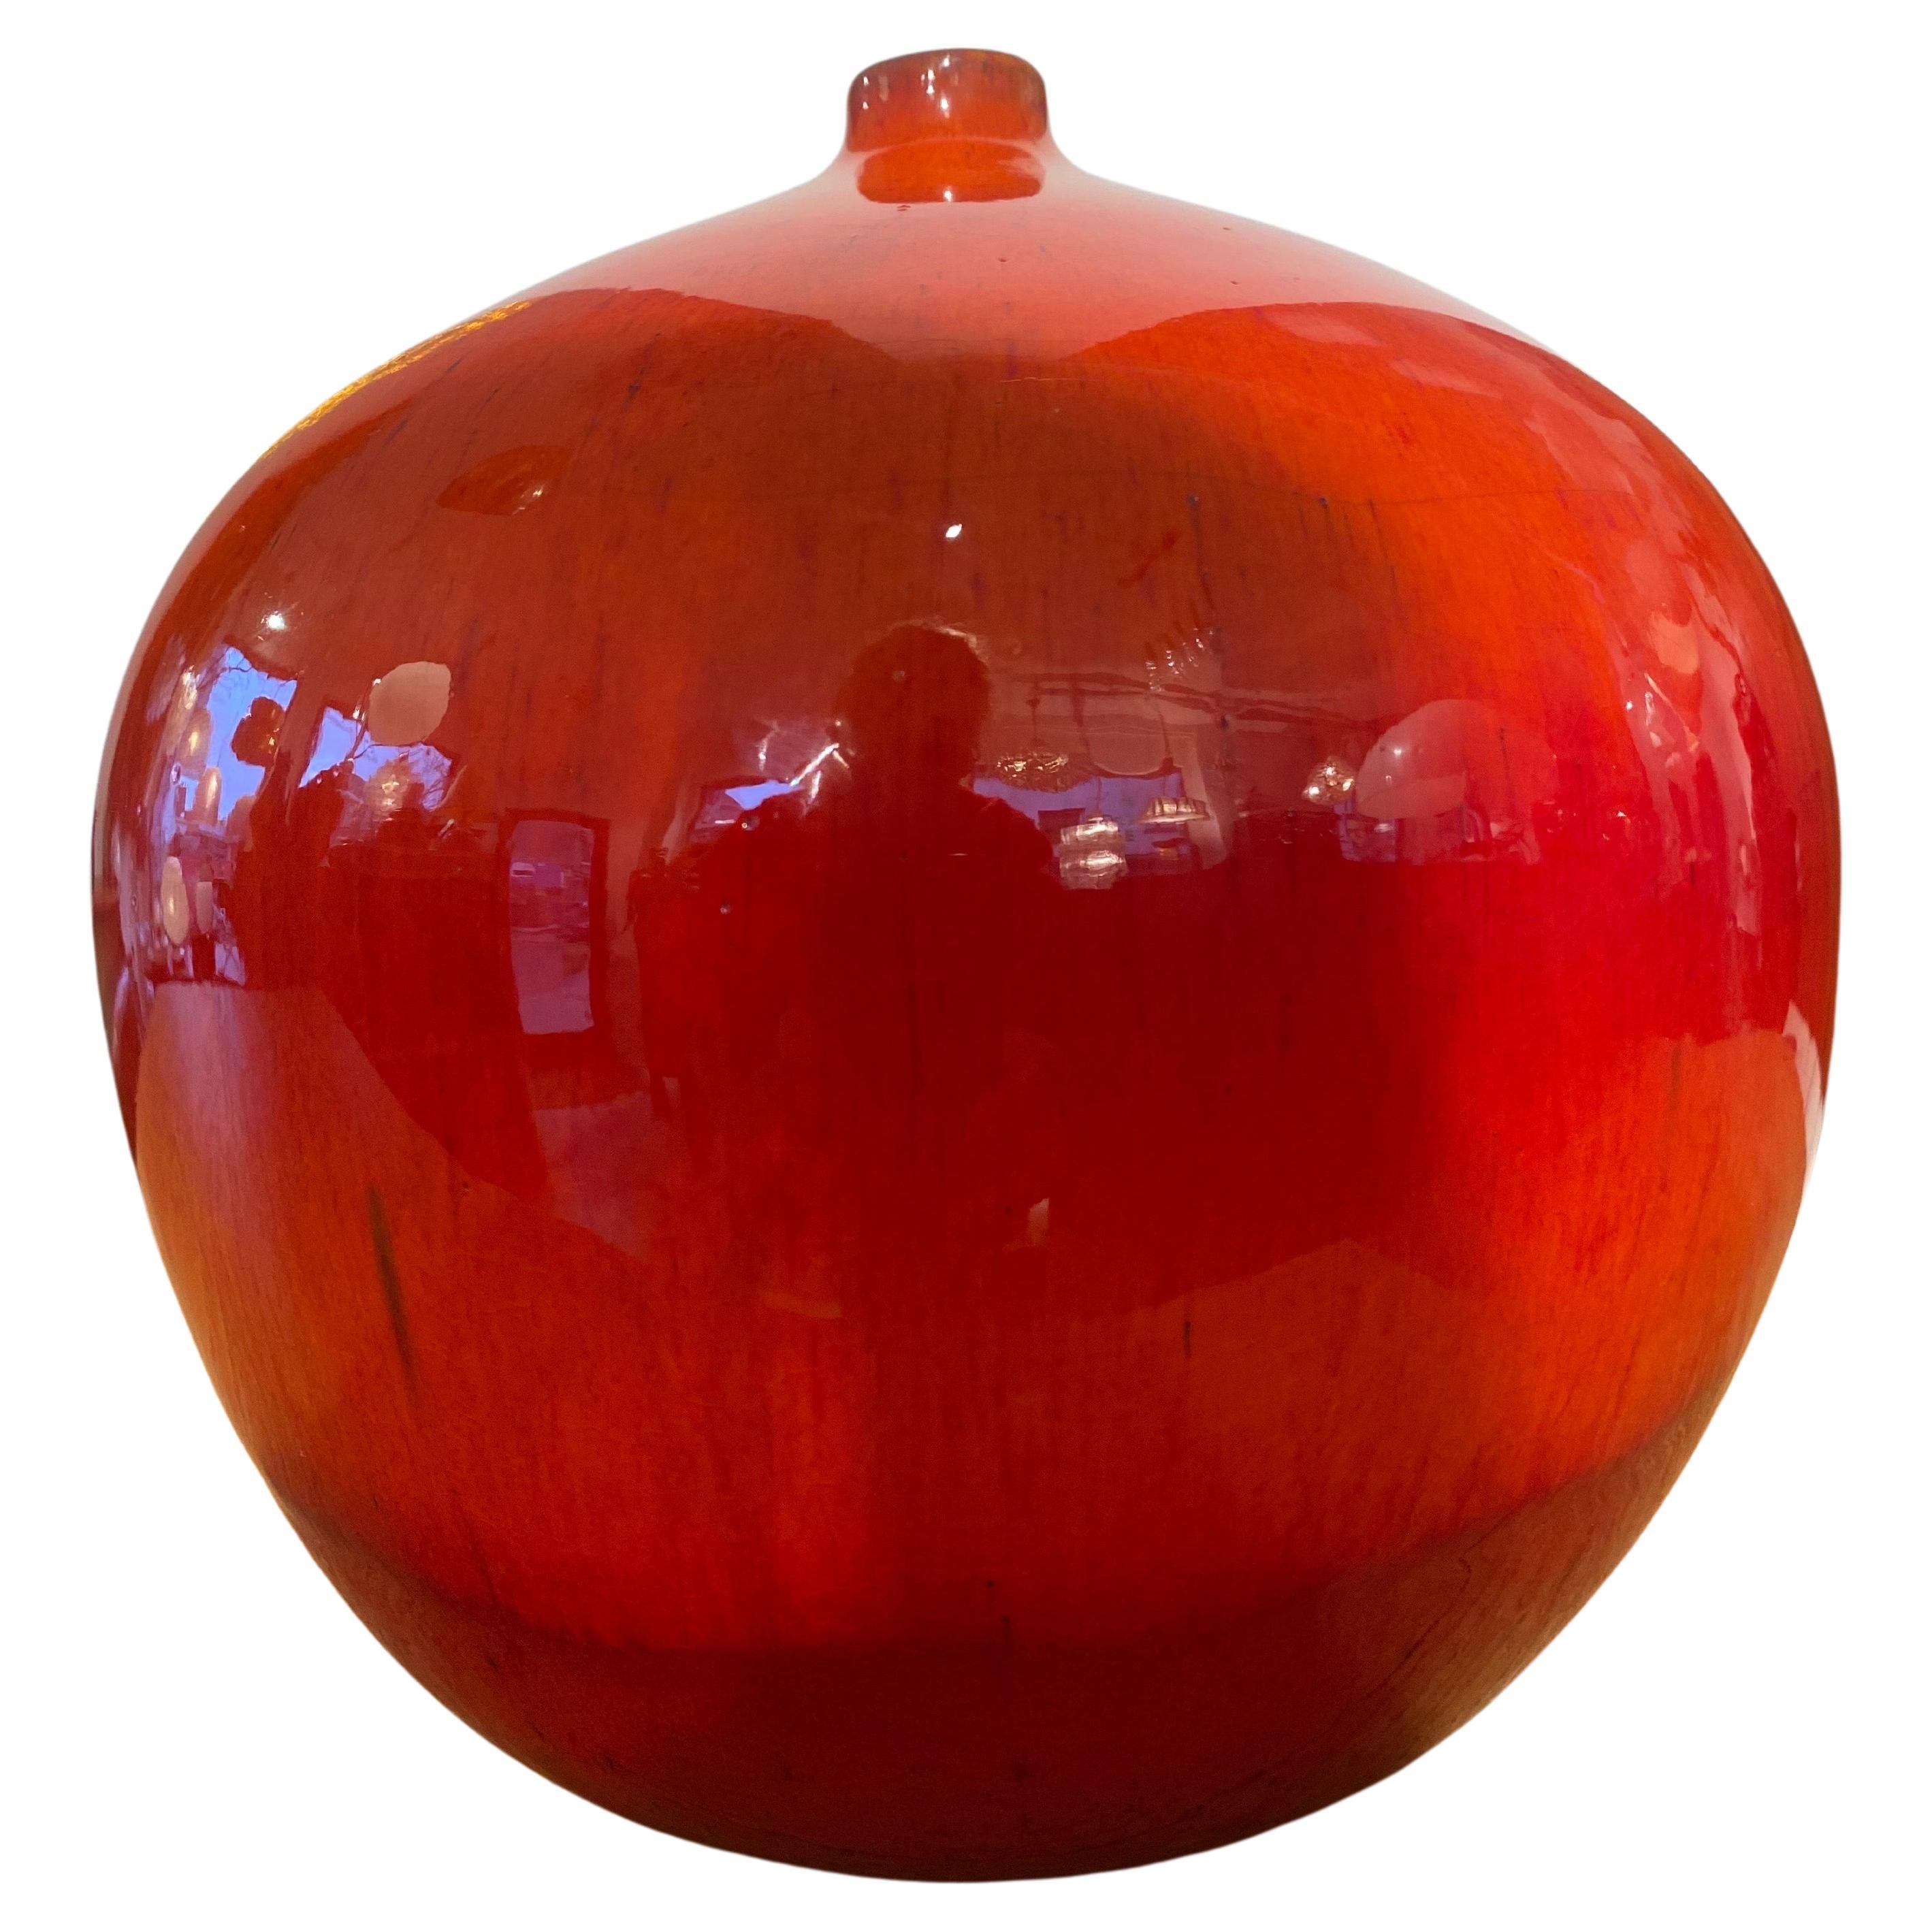 Beautifully intense red glazed hand thrown spherical vase with oxidation firing designed by Rogier Vandeweghe and signed by Perignem, Beernem, Belgium 1960s.It is marked on the bottom. This vase is in perfect condition.